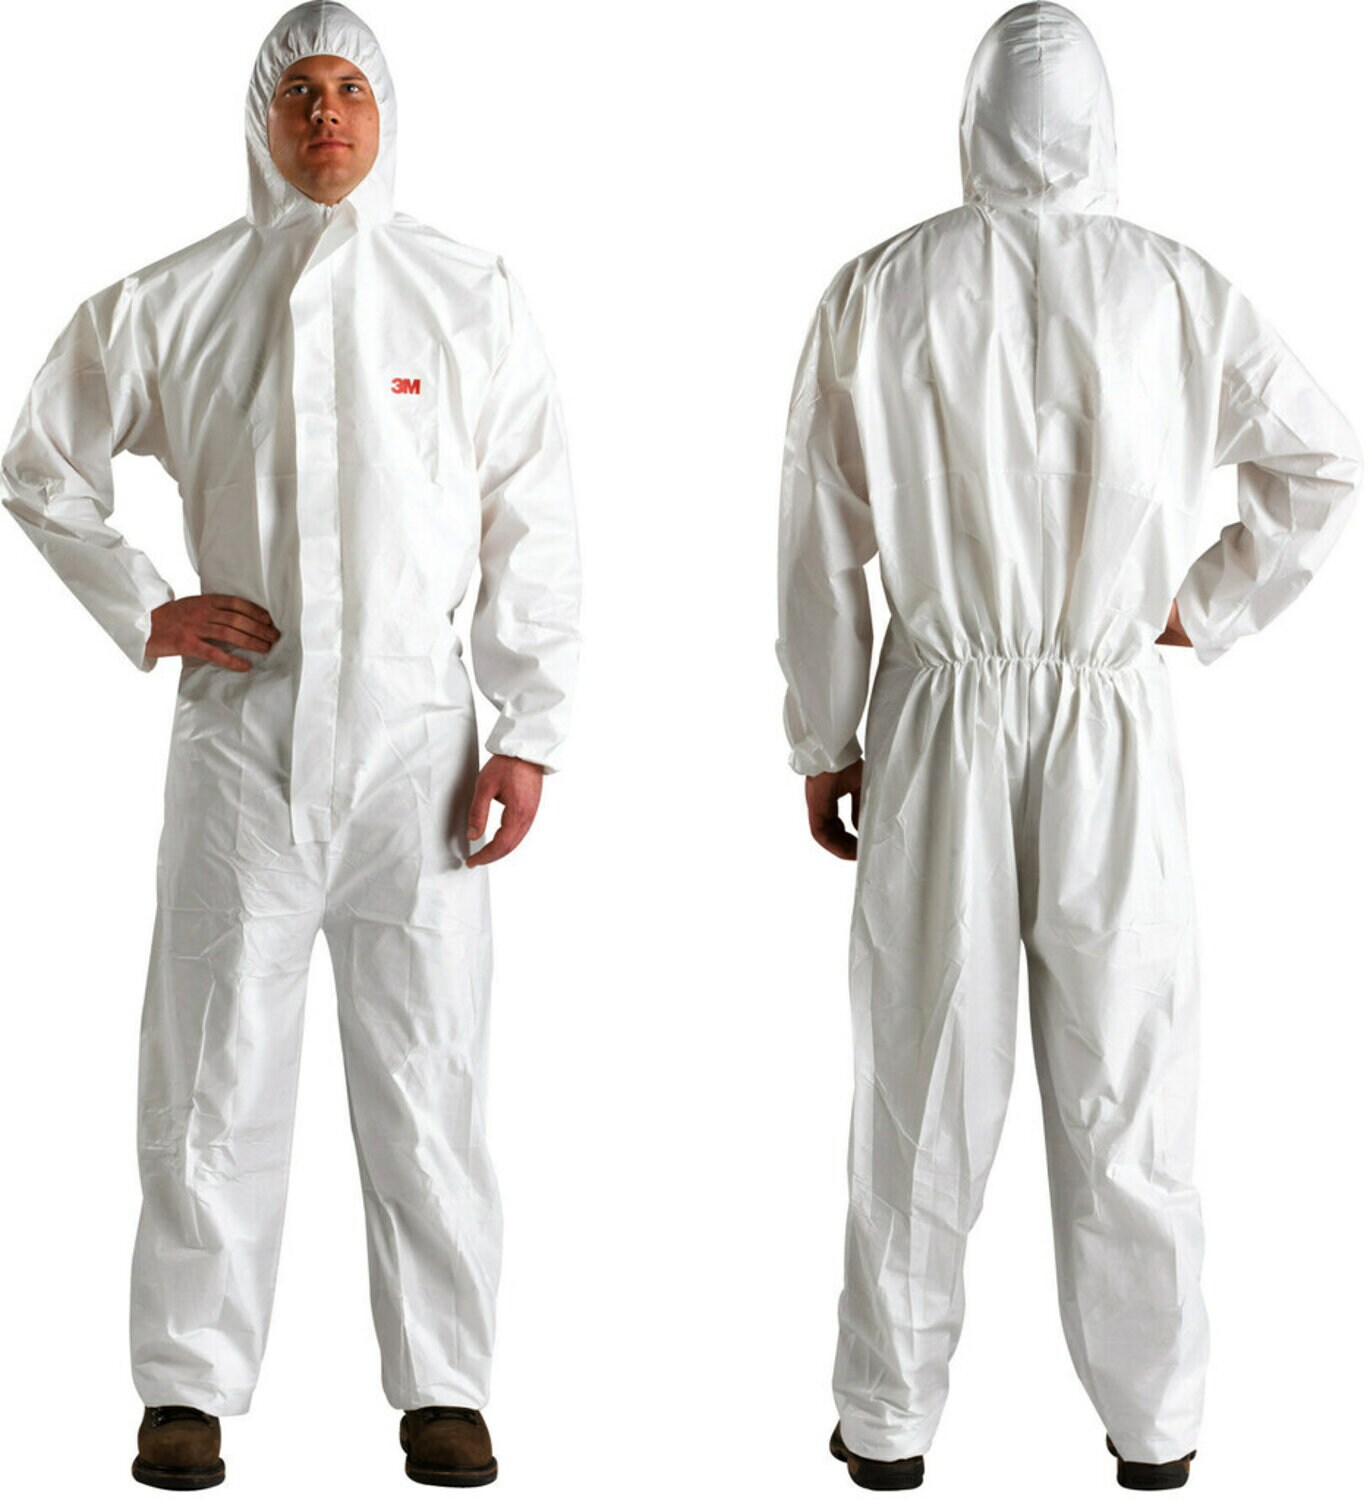 7000089667 - 3M Disposable Protective Coverall 4510, 4XL, White, Type 5/6, 20
EA/Case